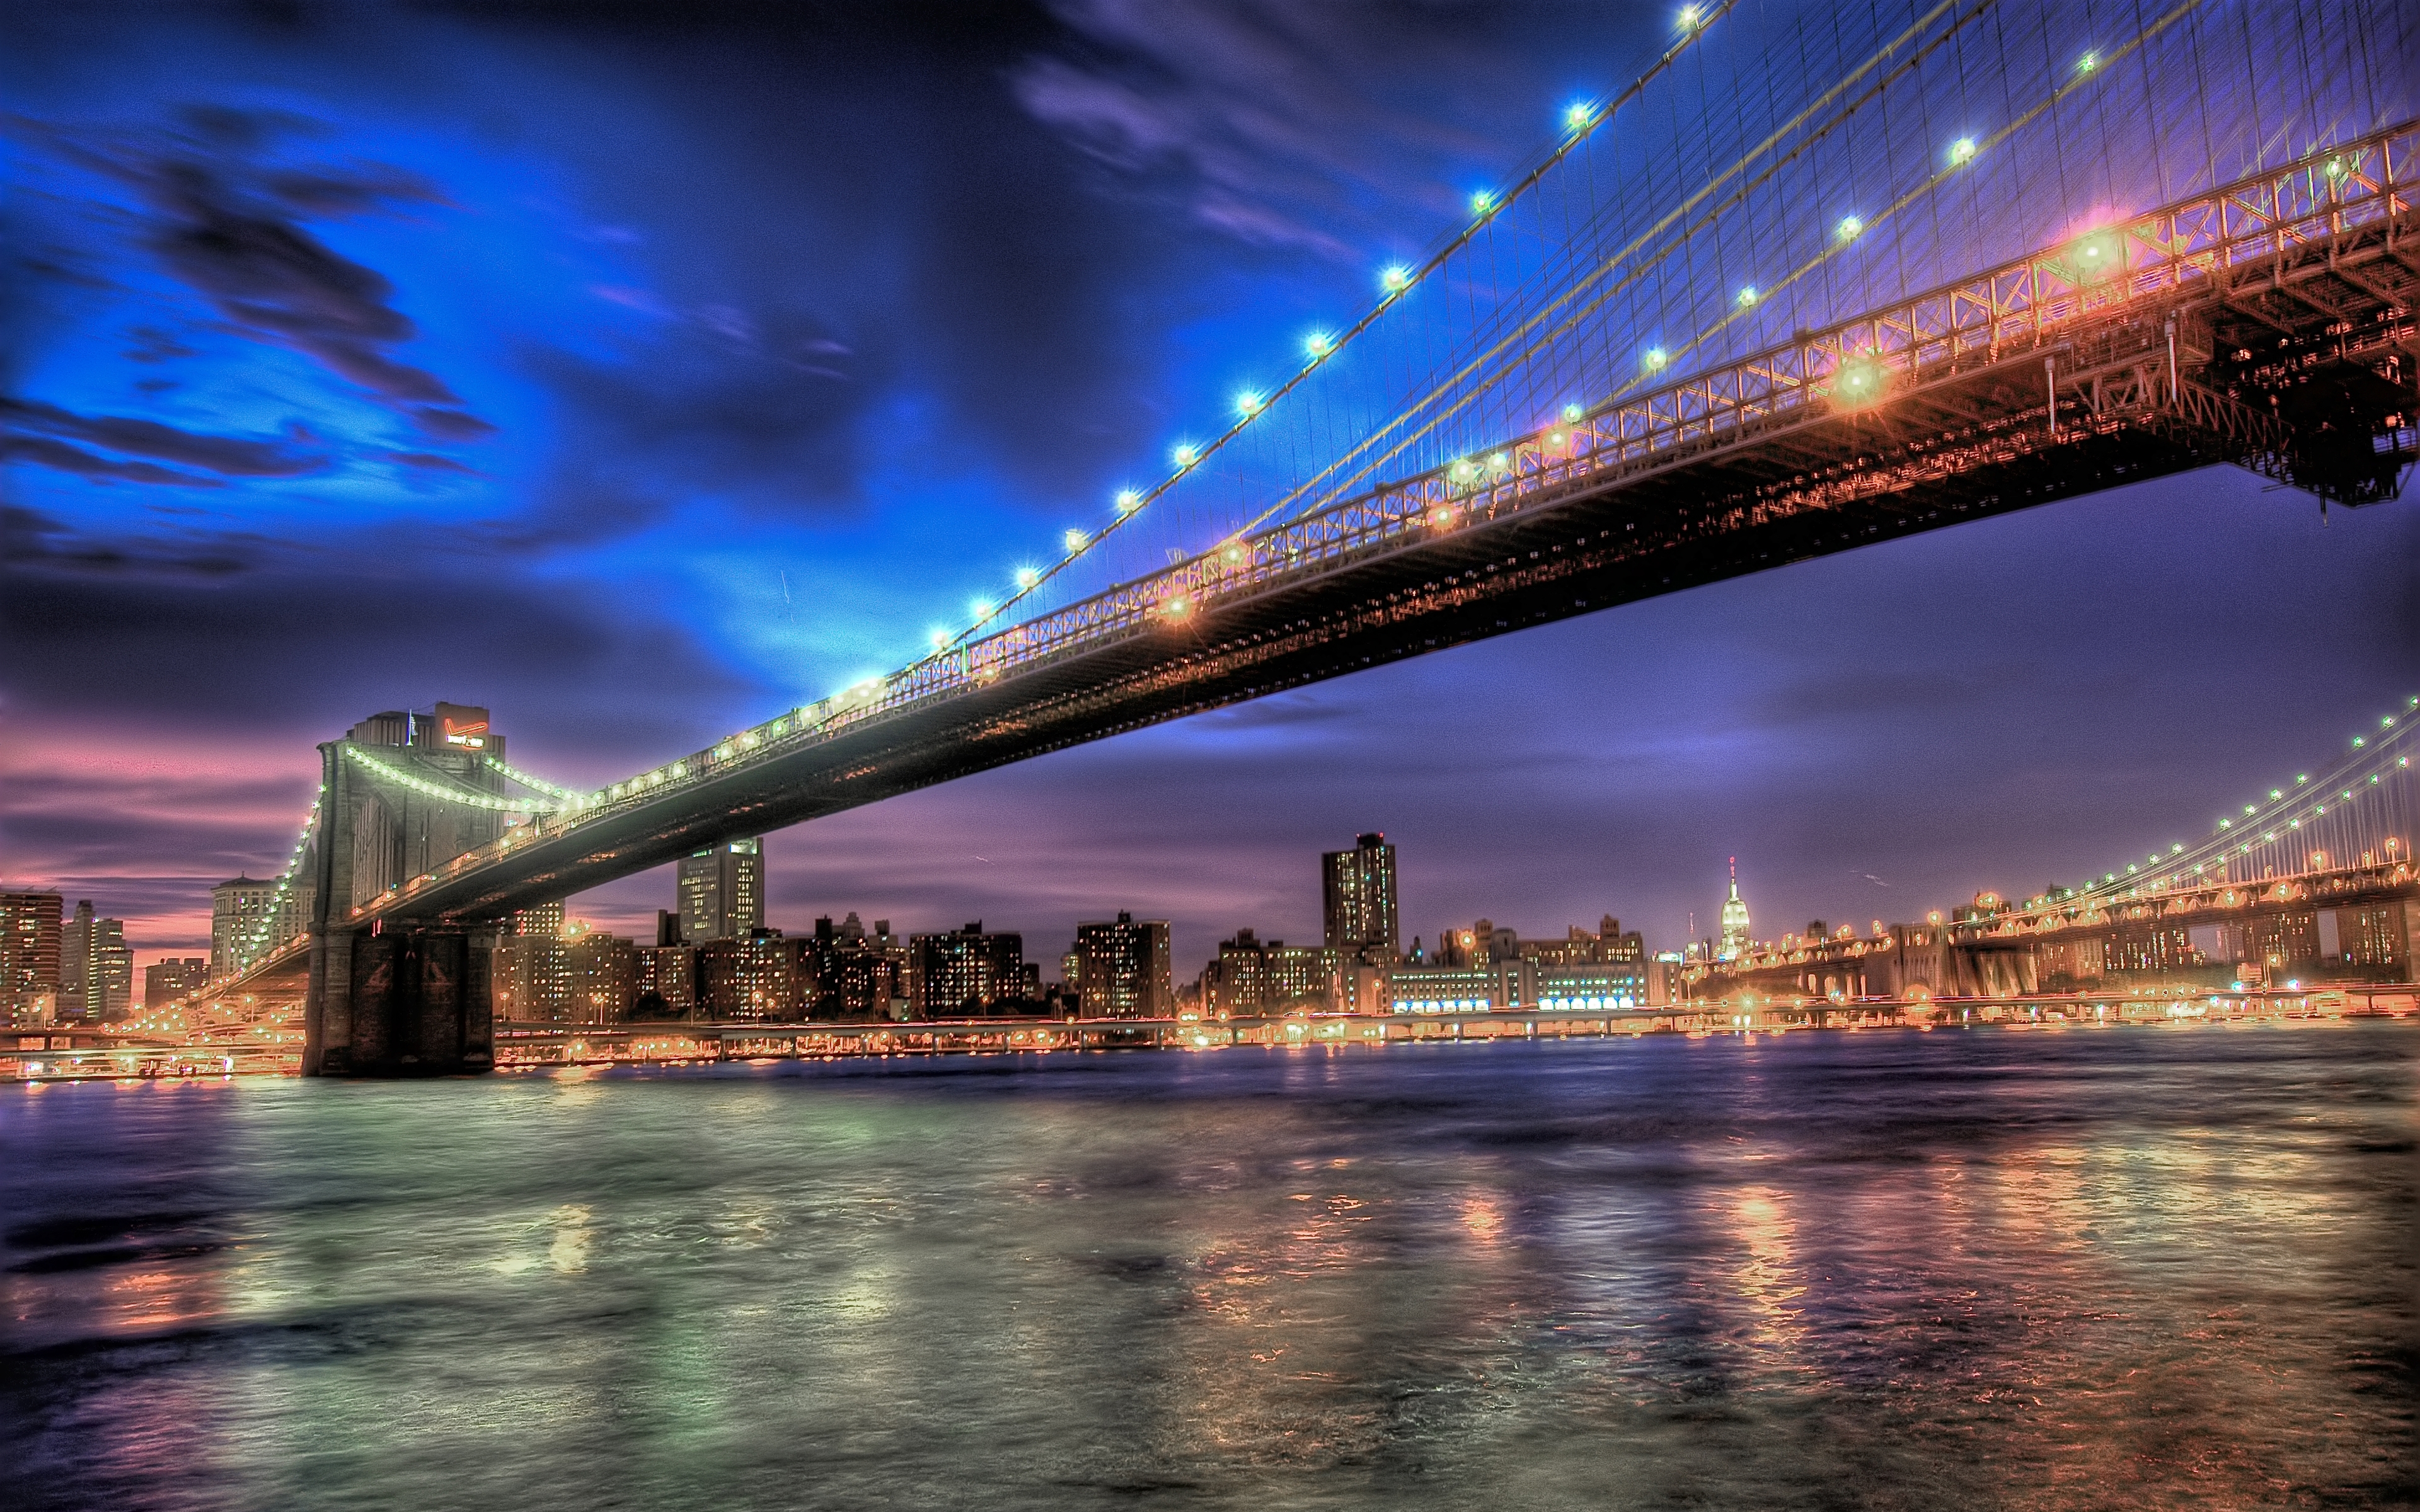 A nighttime bridge over the water in New York City